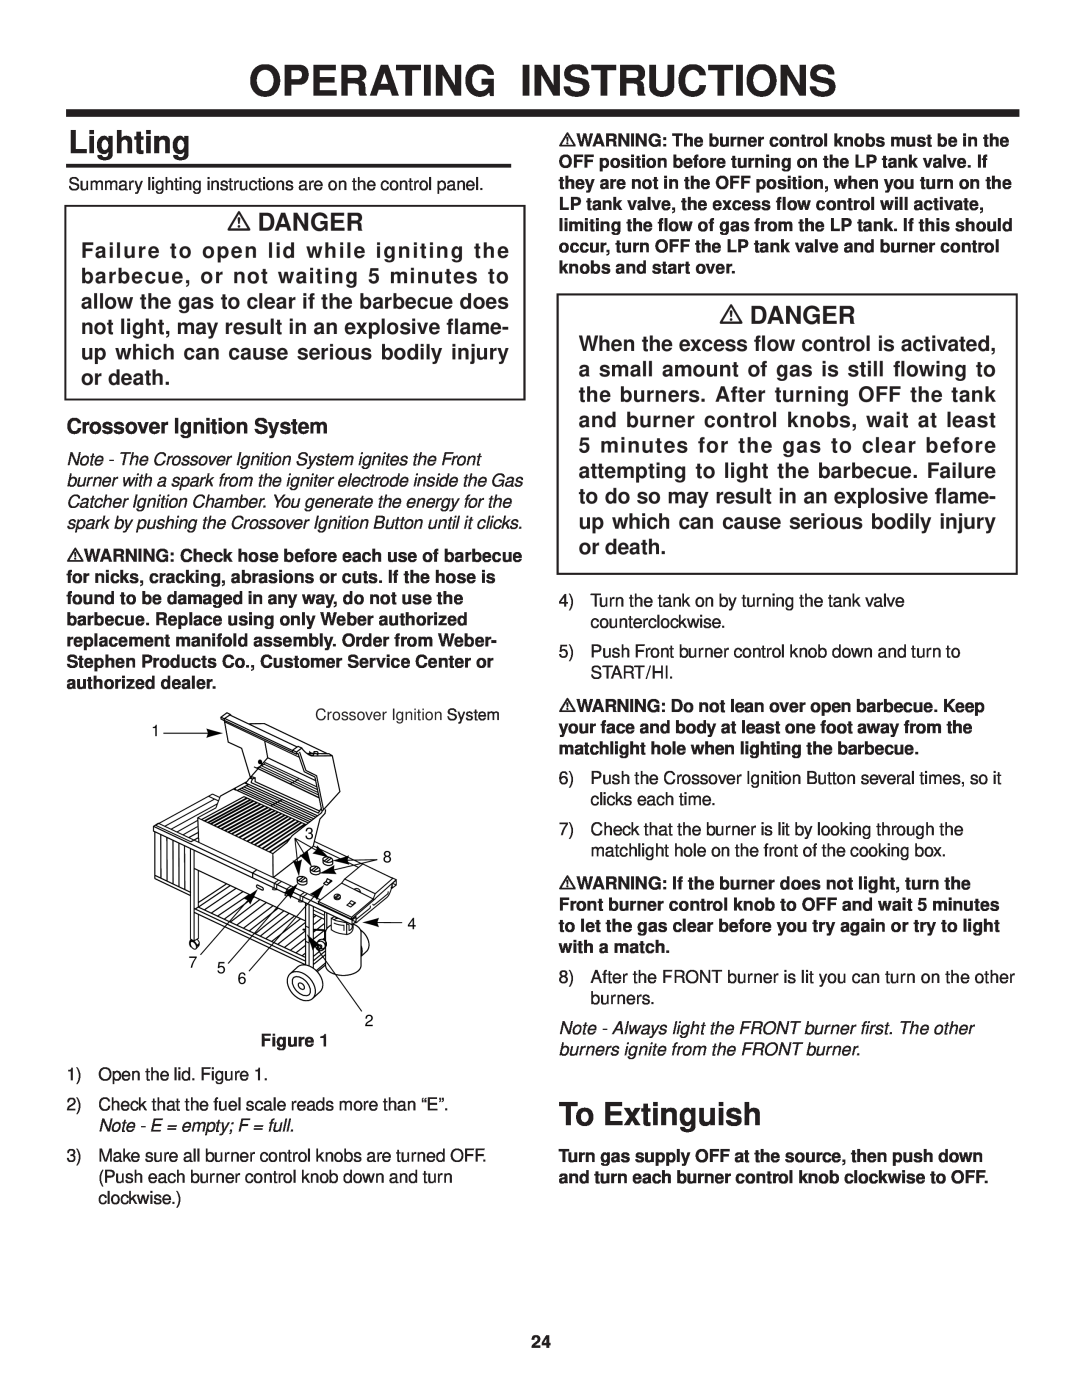 Weber 3000 owner manual Operating Instructions, Lighting, To Extinguish, m DANGER, Crossover Ignition System 